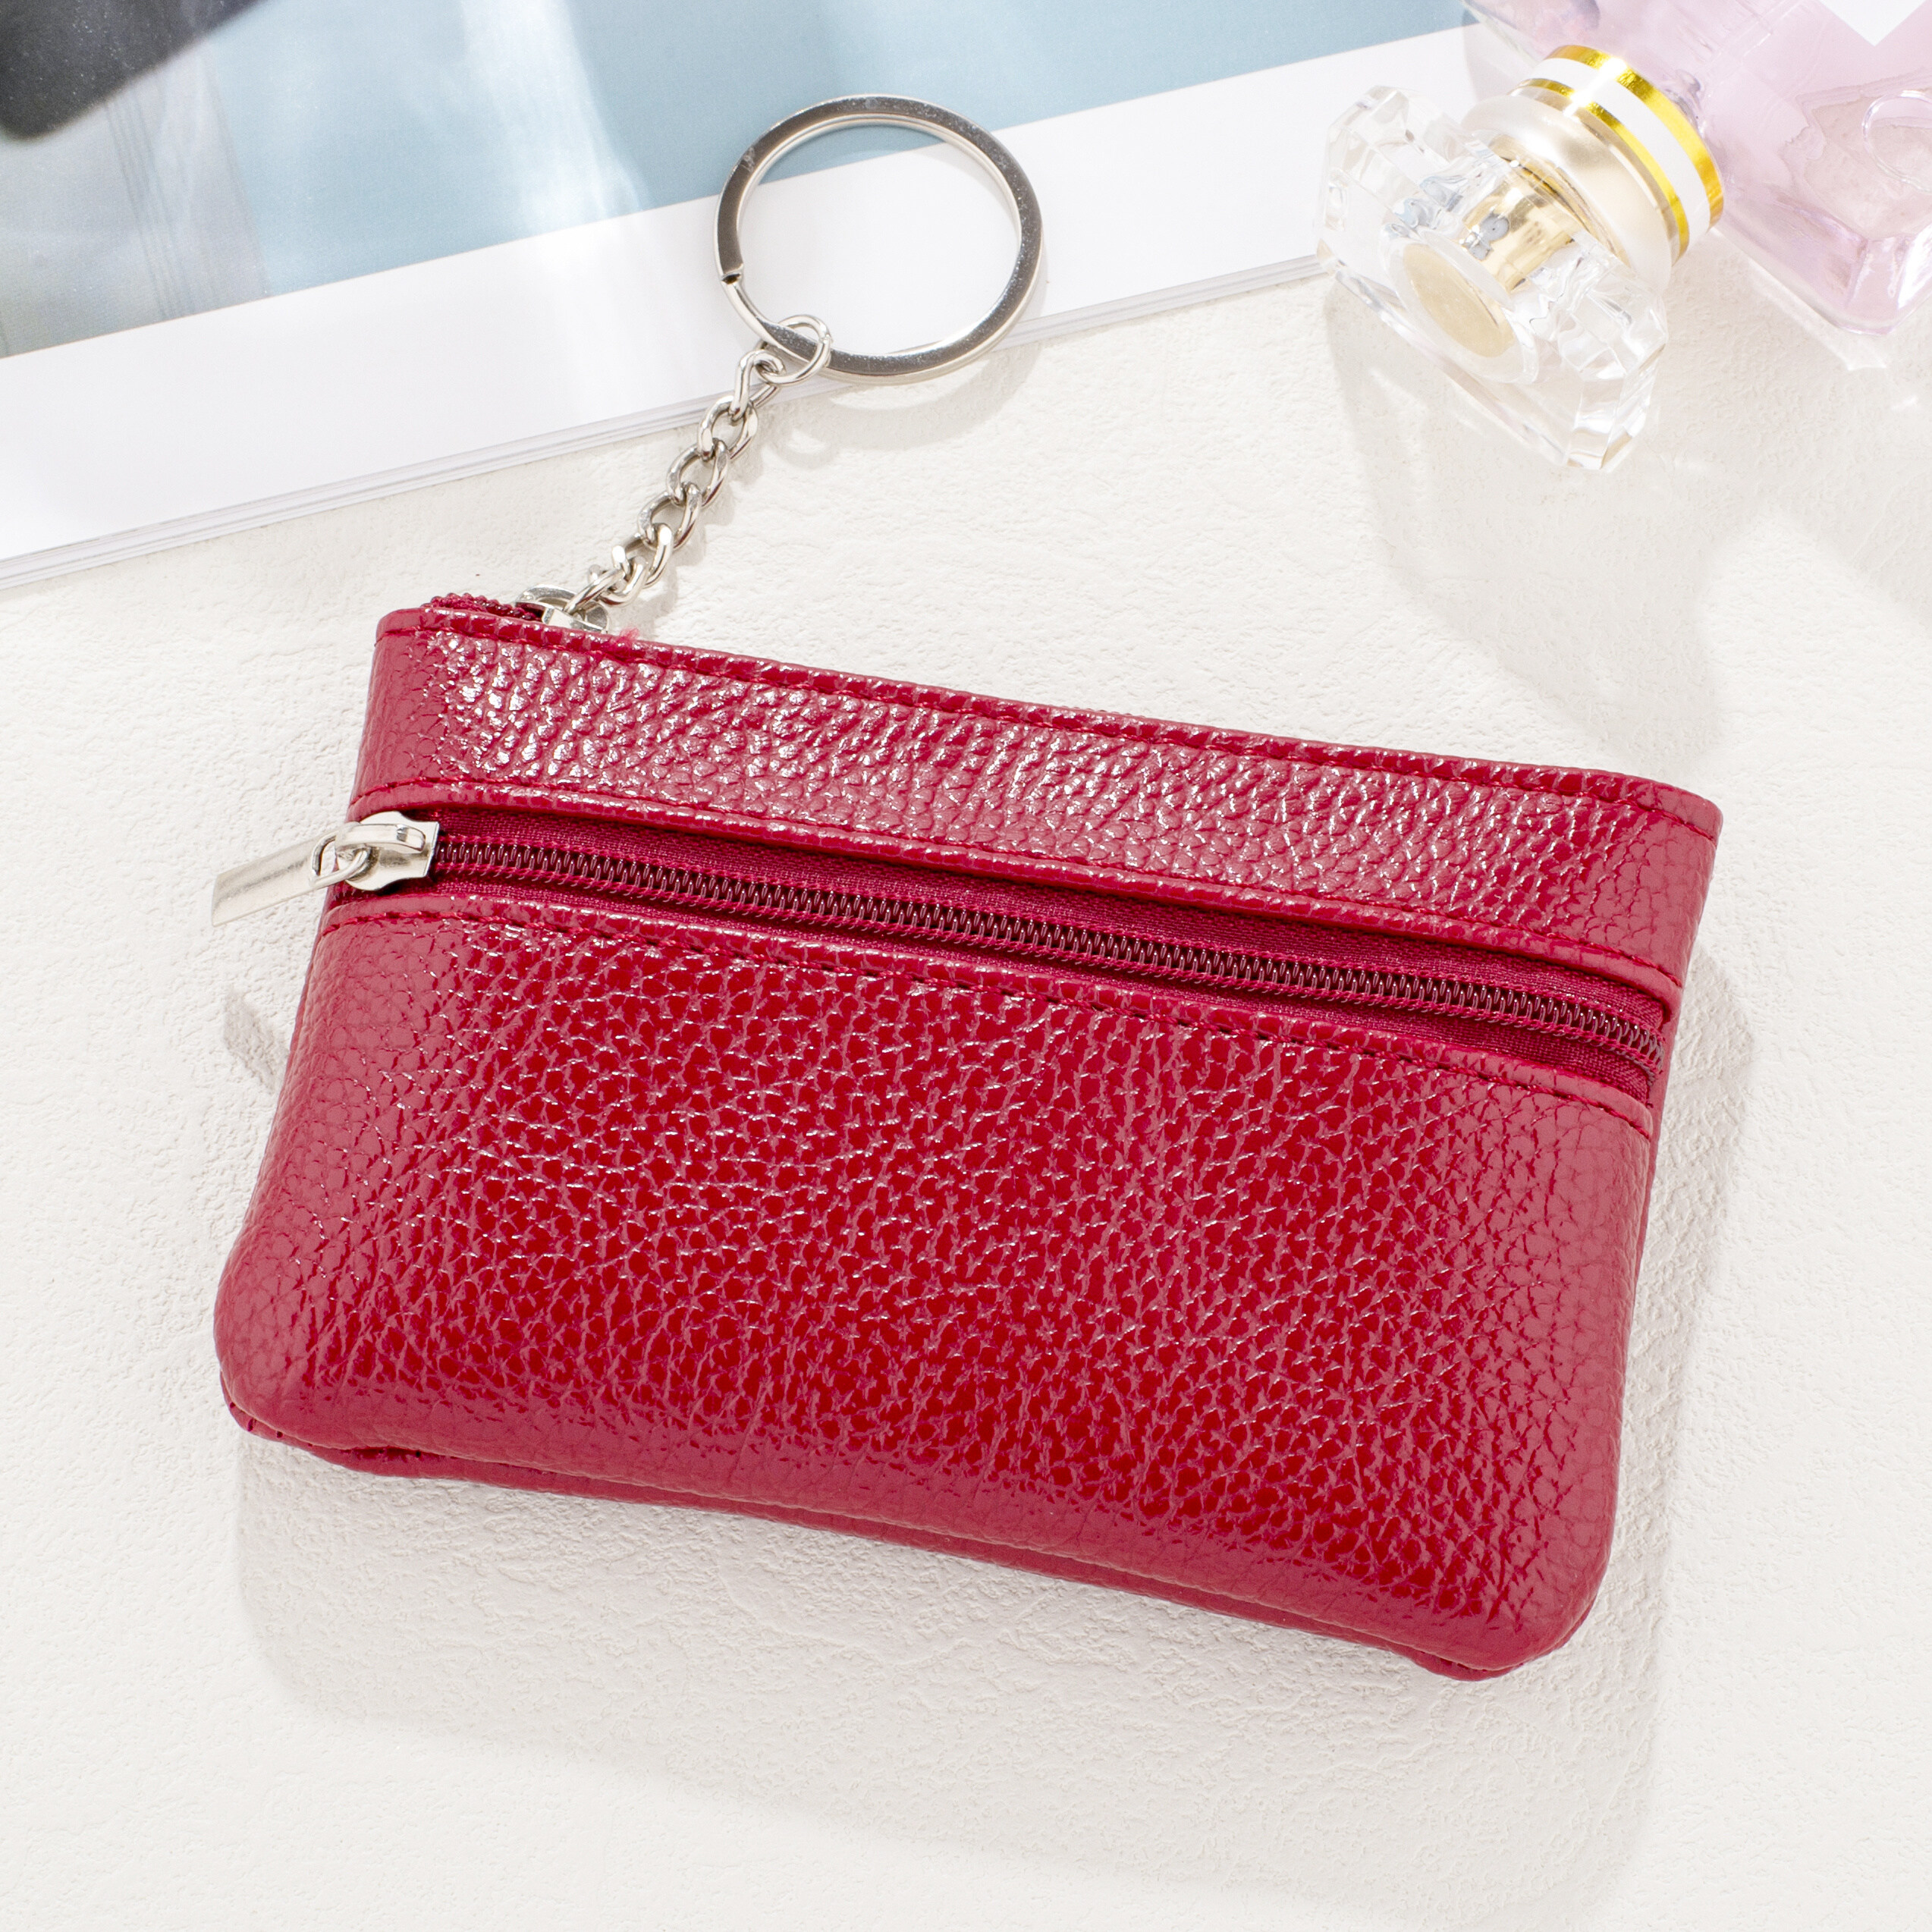 Zip Coin Purse Small Leather Purse for Women Christmas Gift 